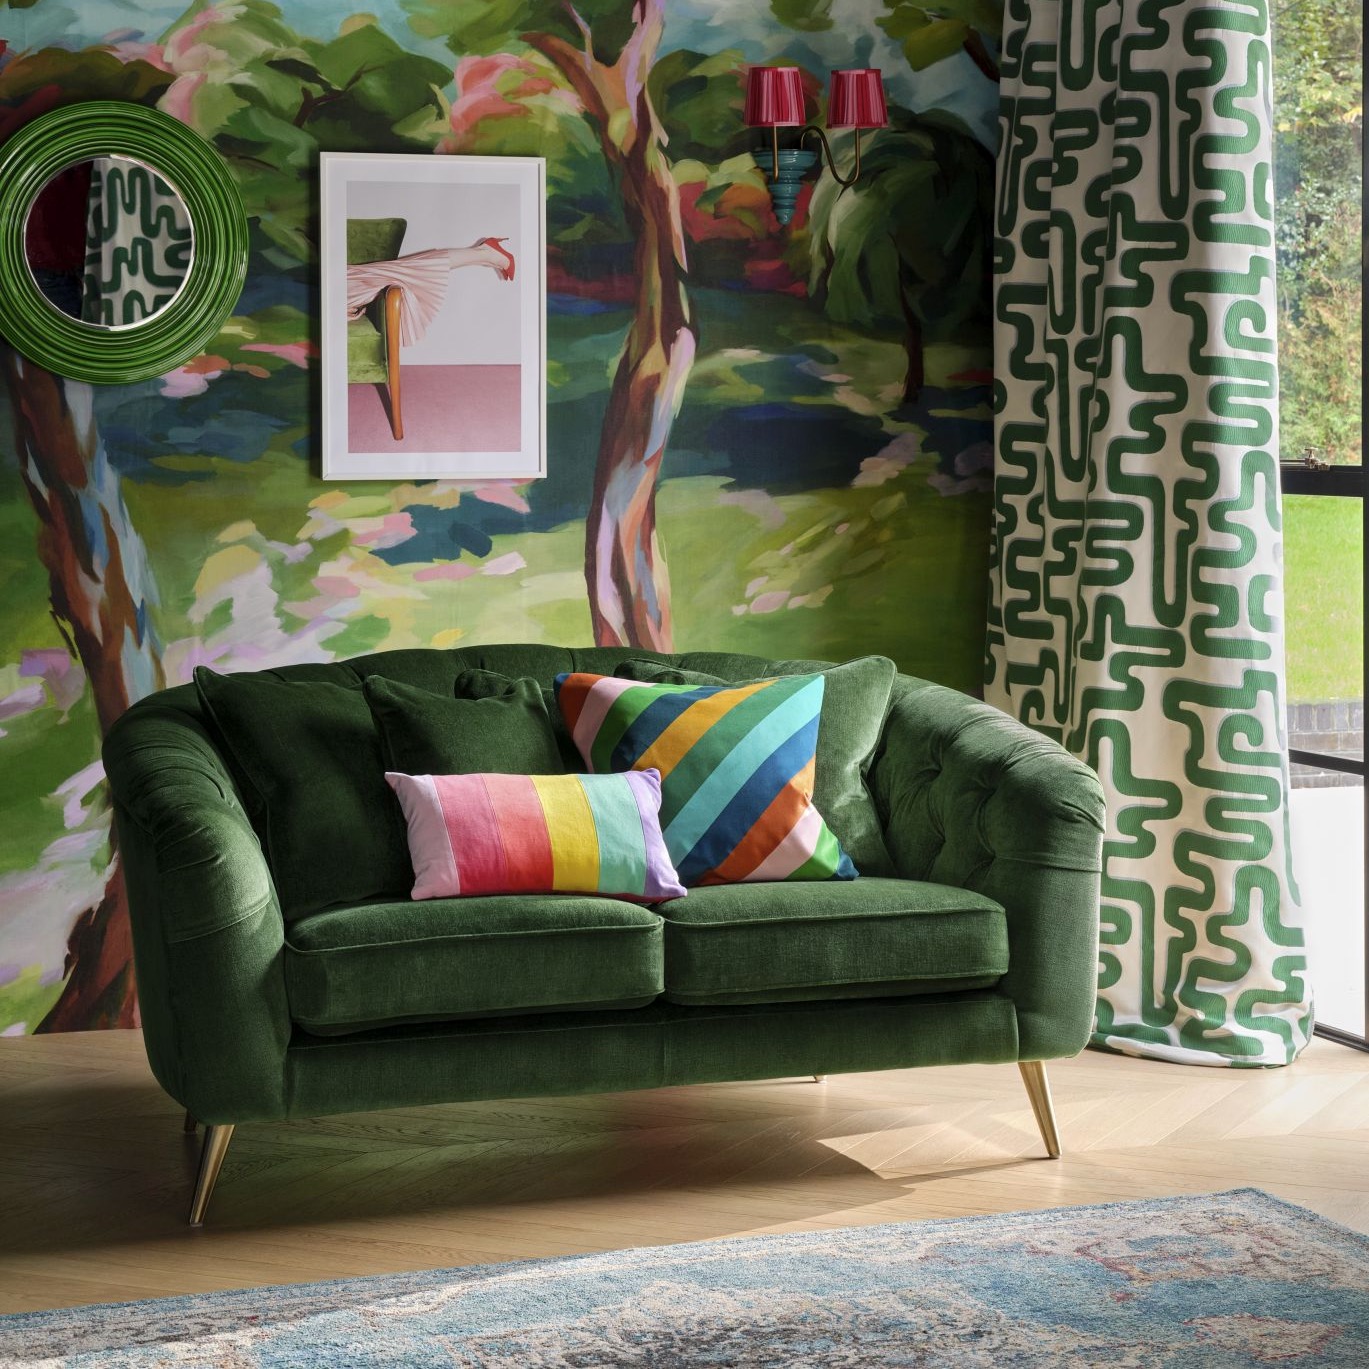 Living room with green sofa a wall mural